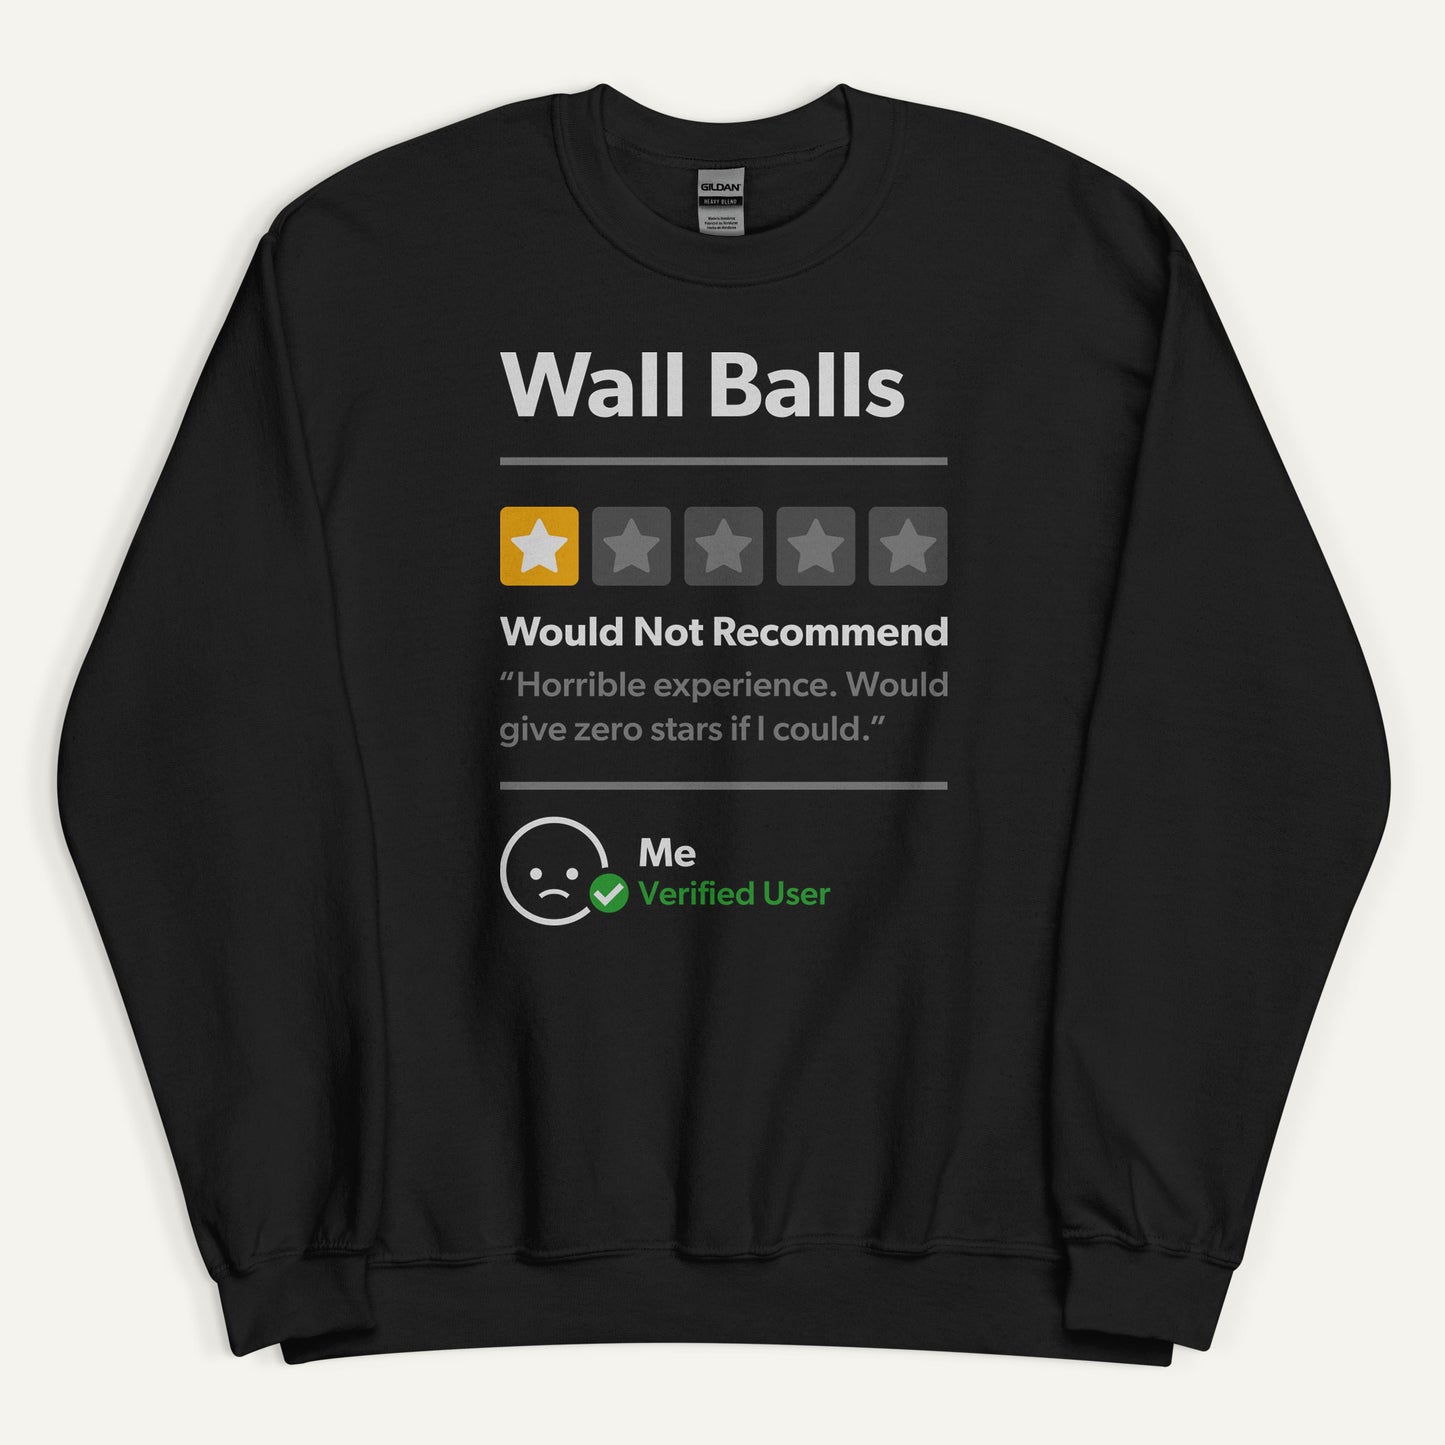 Wall Balls 1 Star Would Not Recommend Sweatshirt